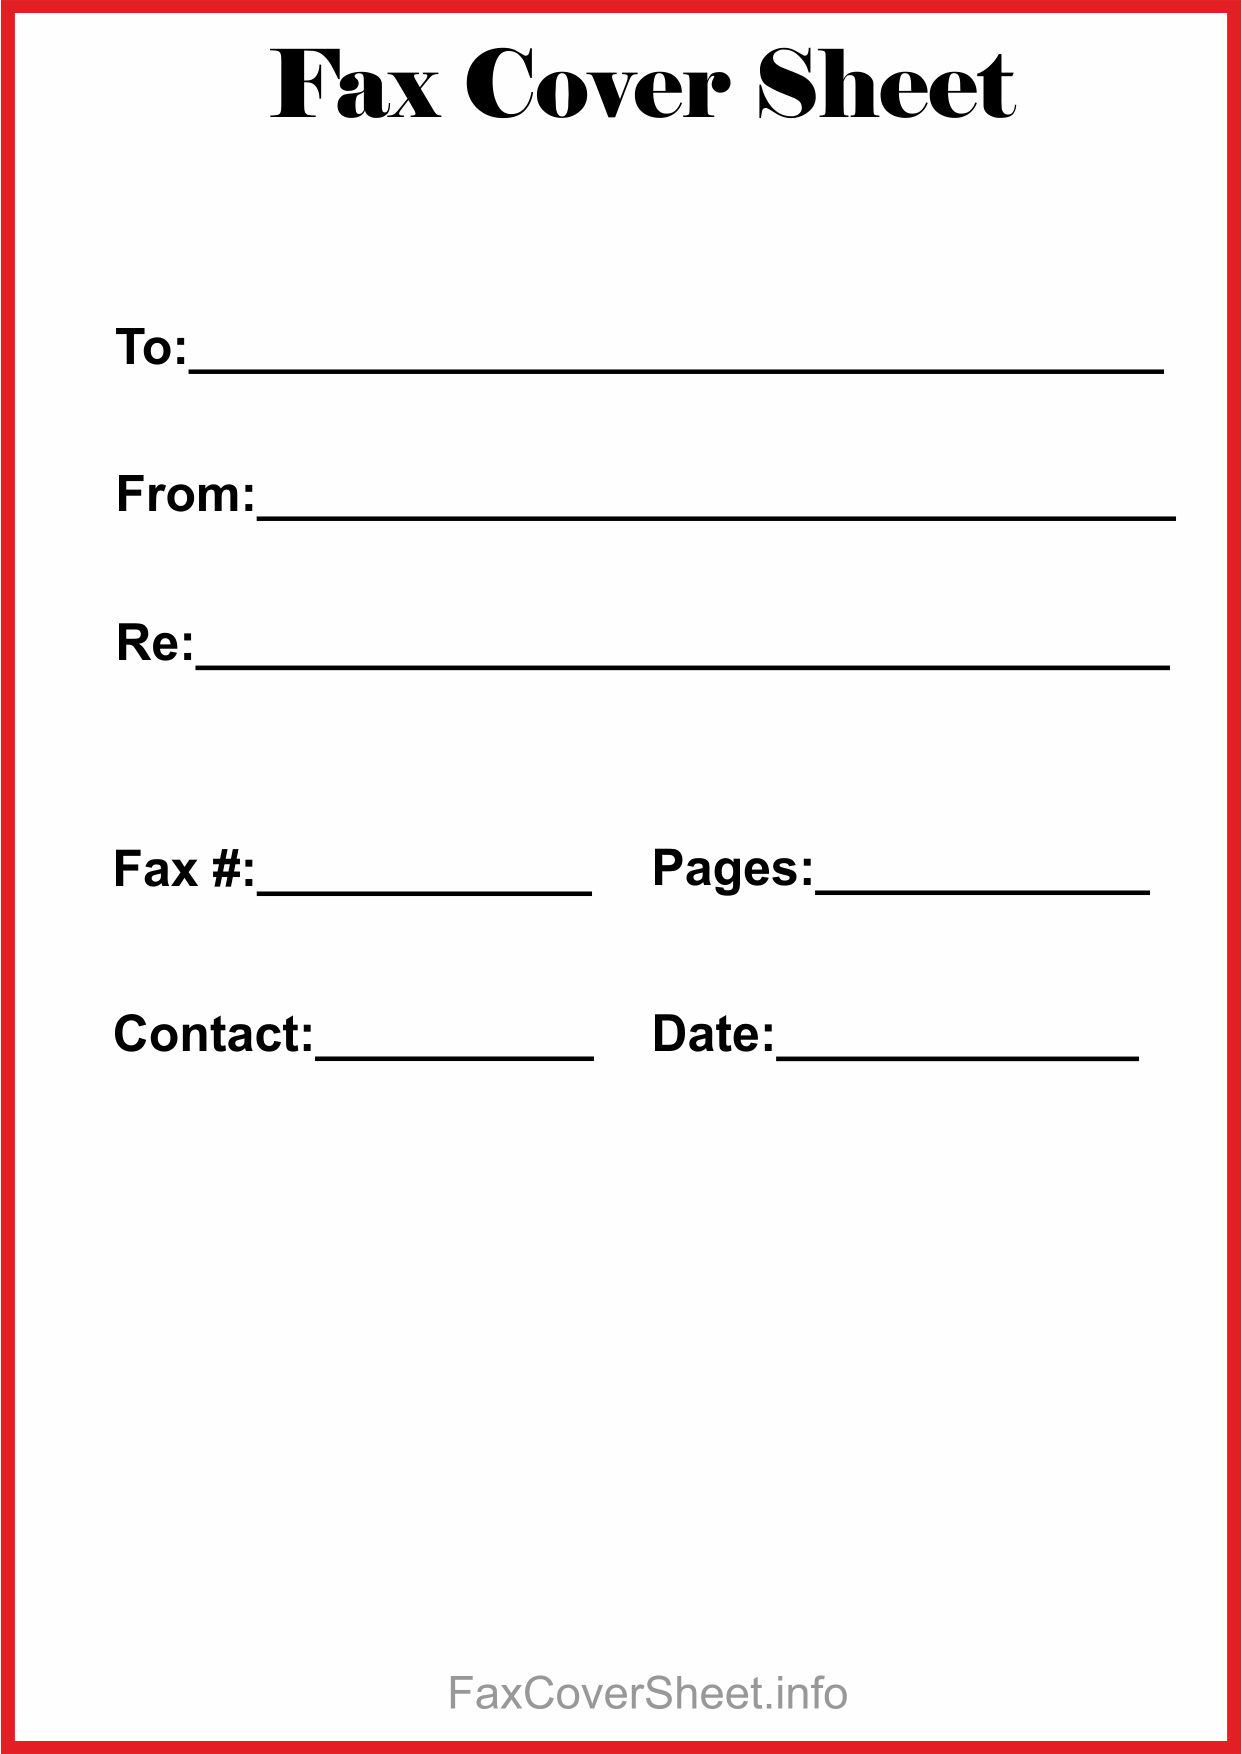 Free]^^ Fax Cover Sheet Template - Free Printable Fax Cover Sheet